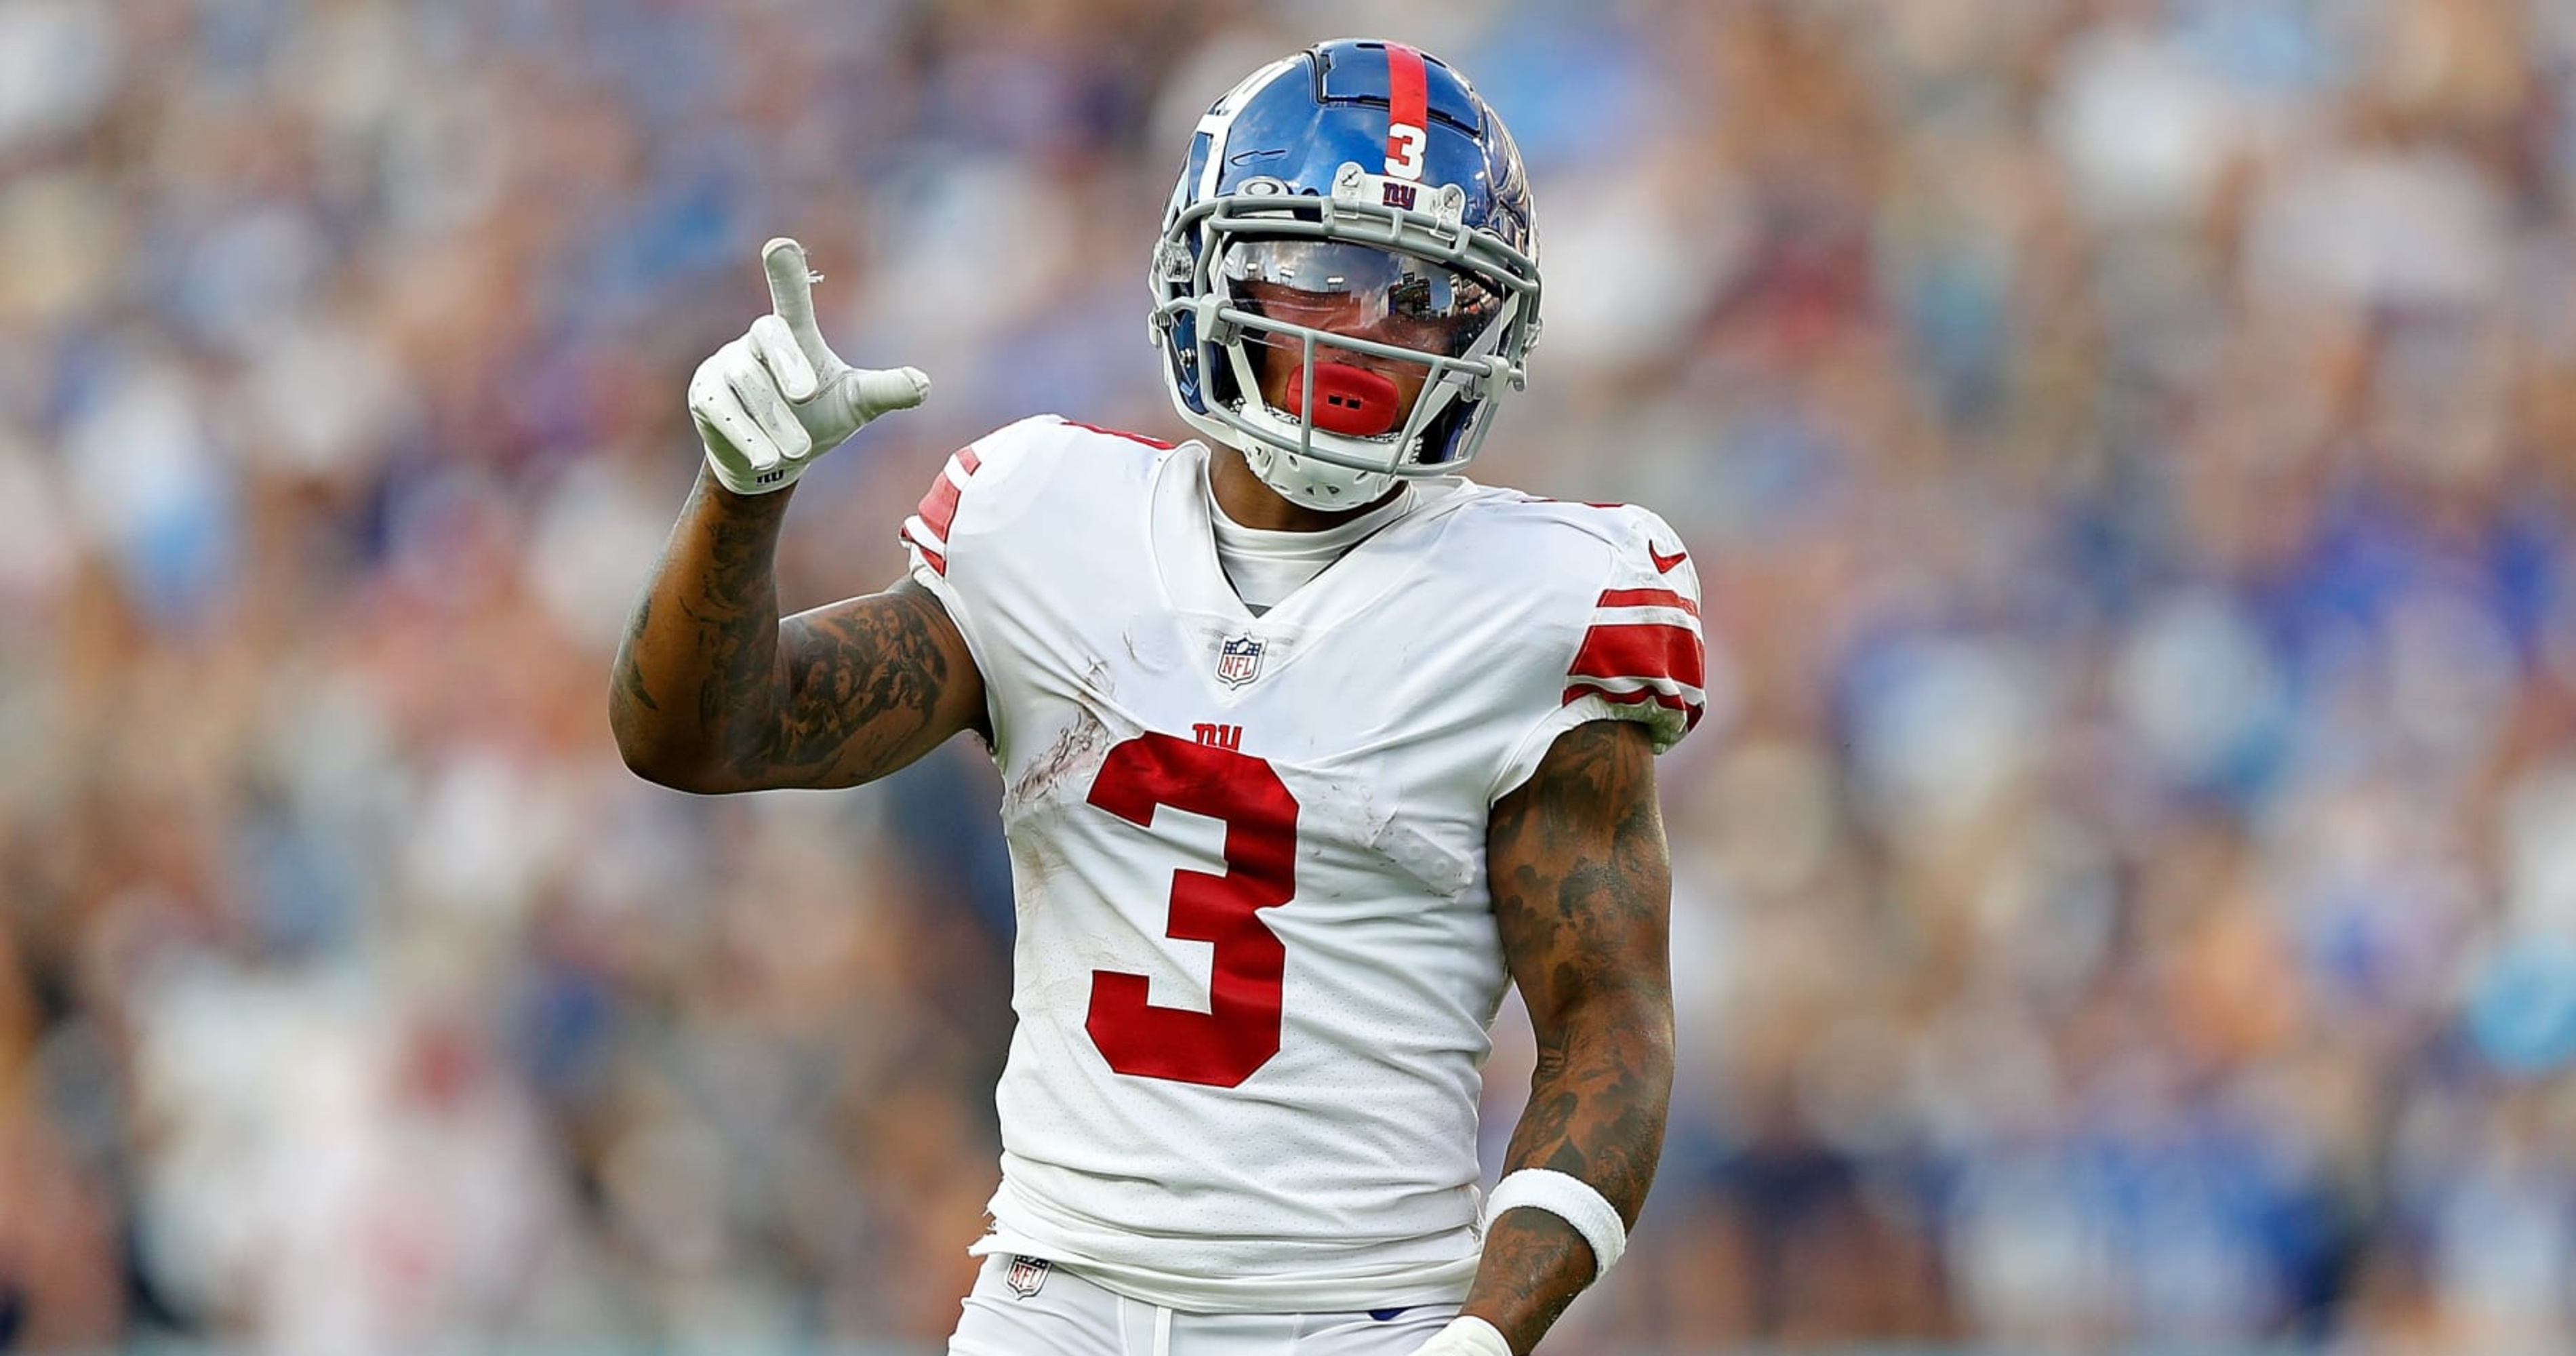 New York Giants - News, Schedule, Scores, Roster, and Stats - The Athletic